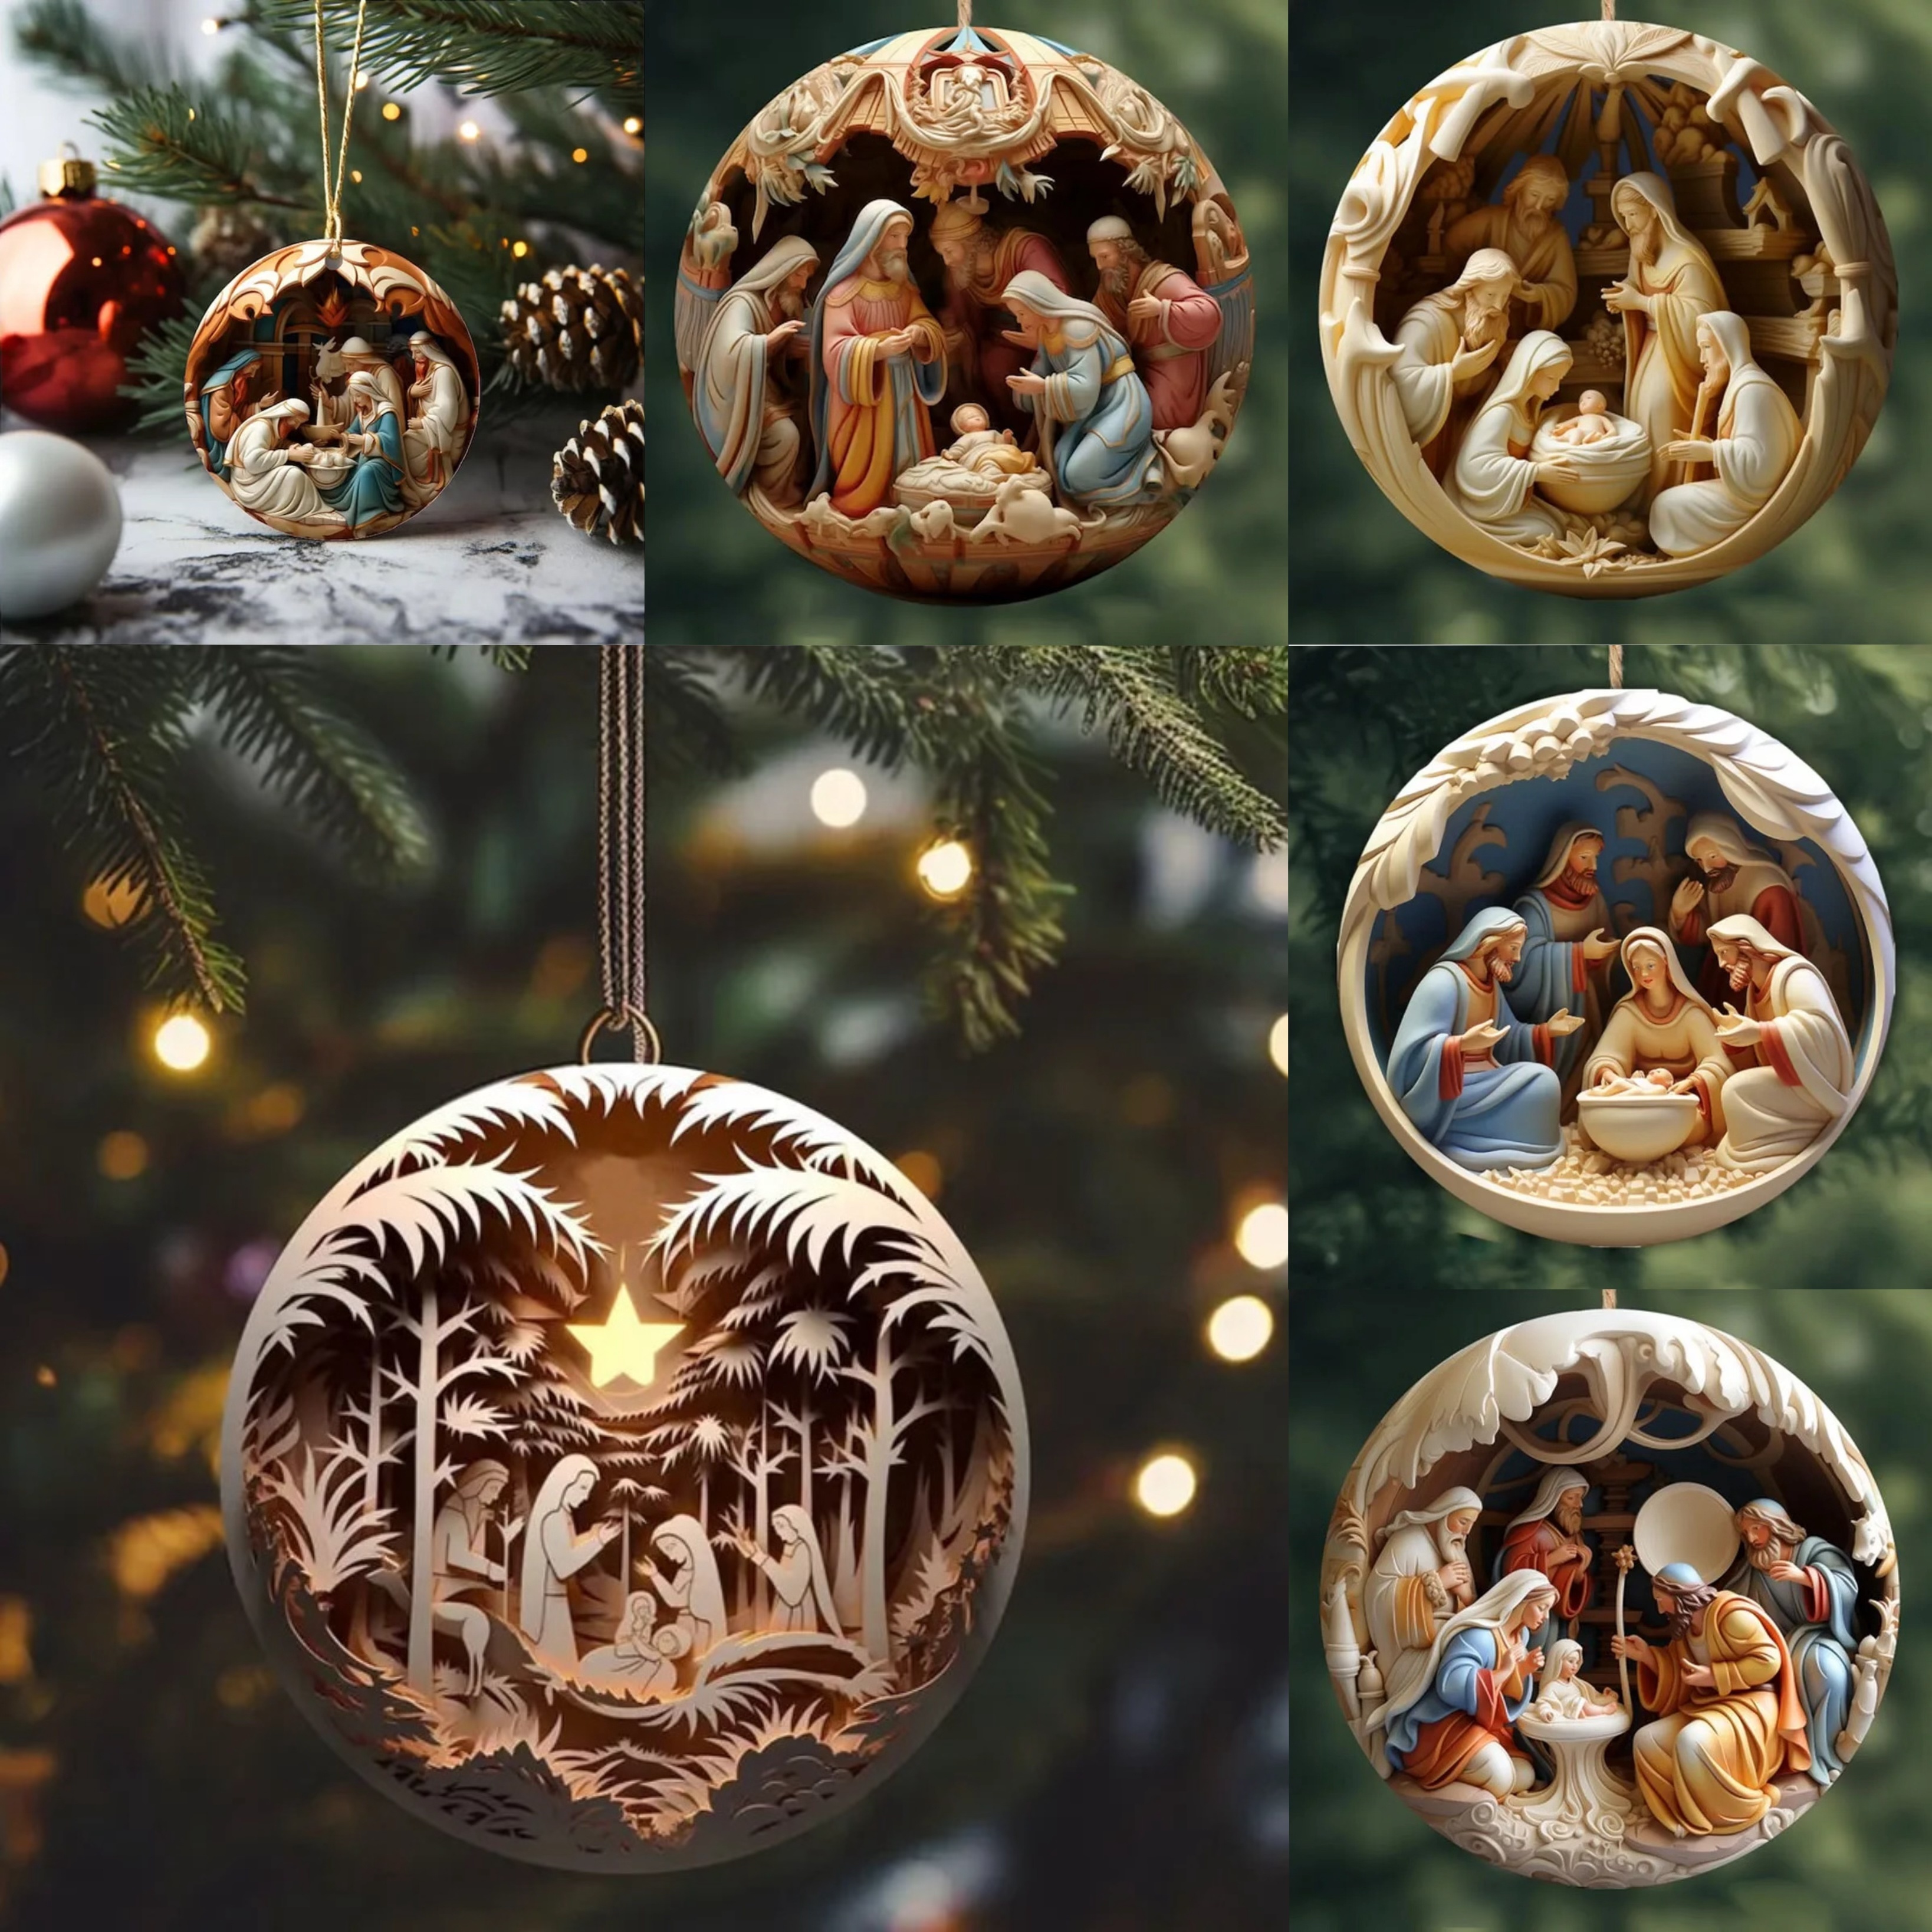 Wooden Hanging Ornament Christmas Tree Decorations Round Figure